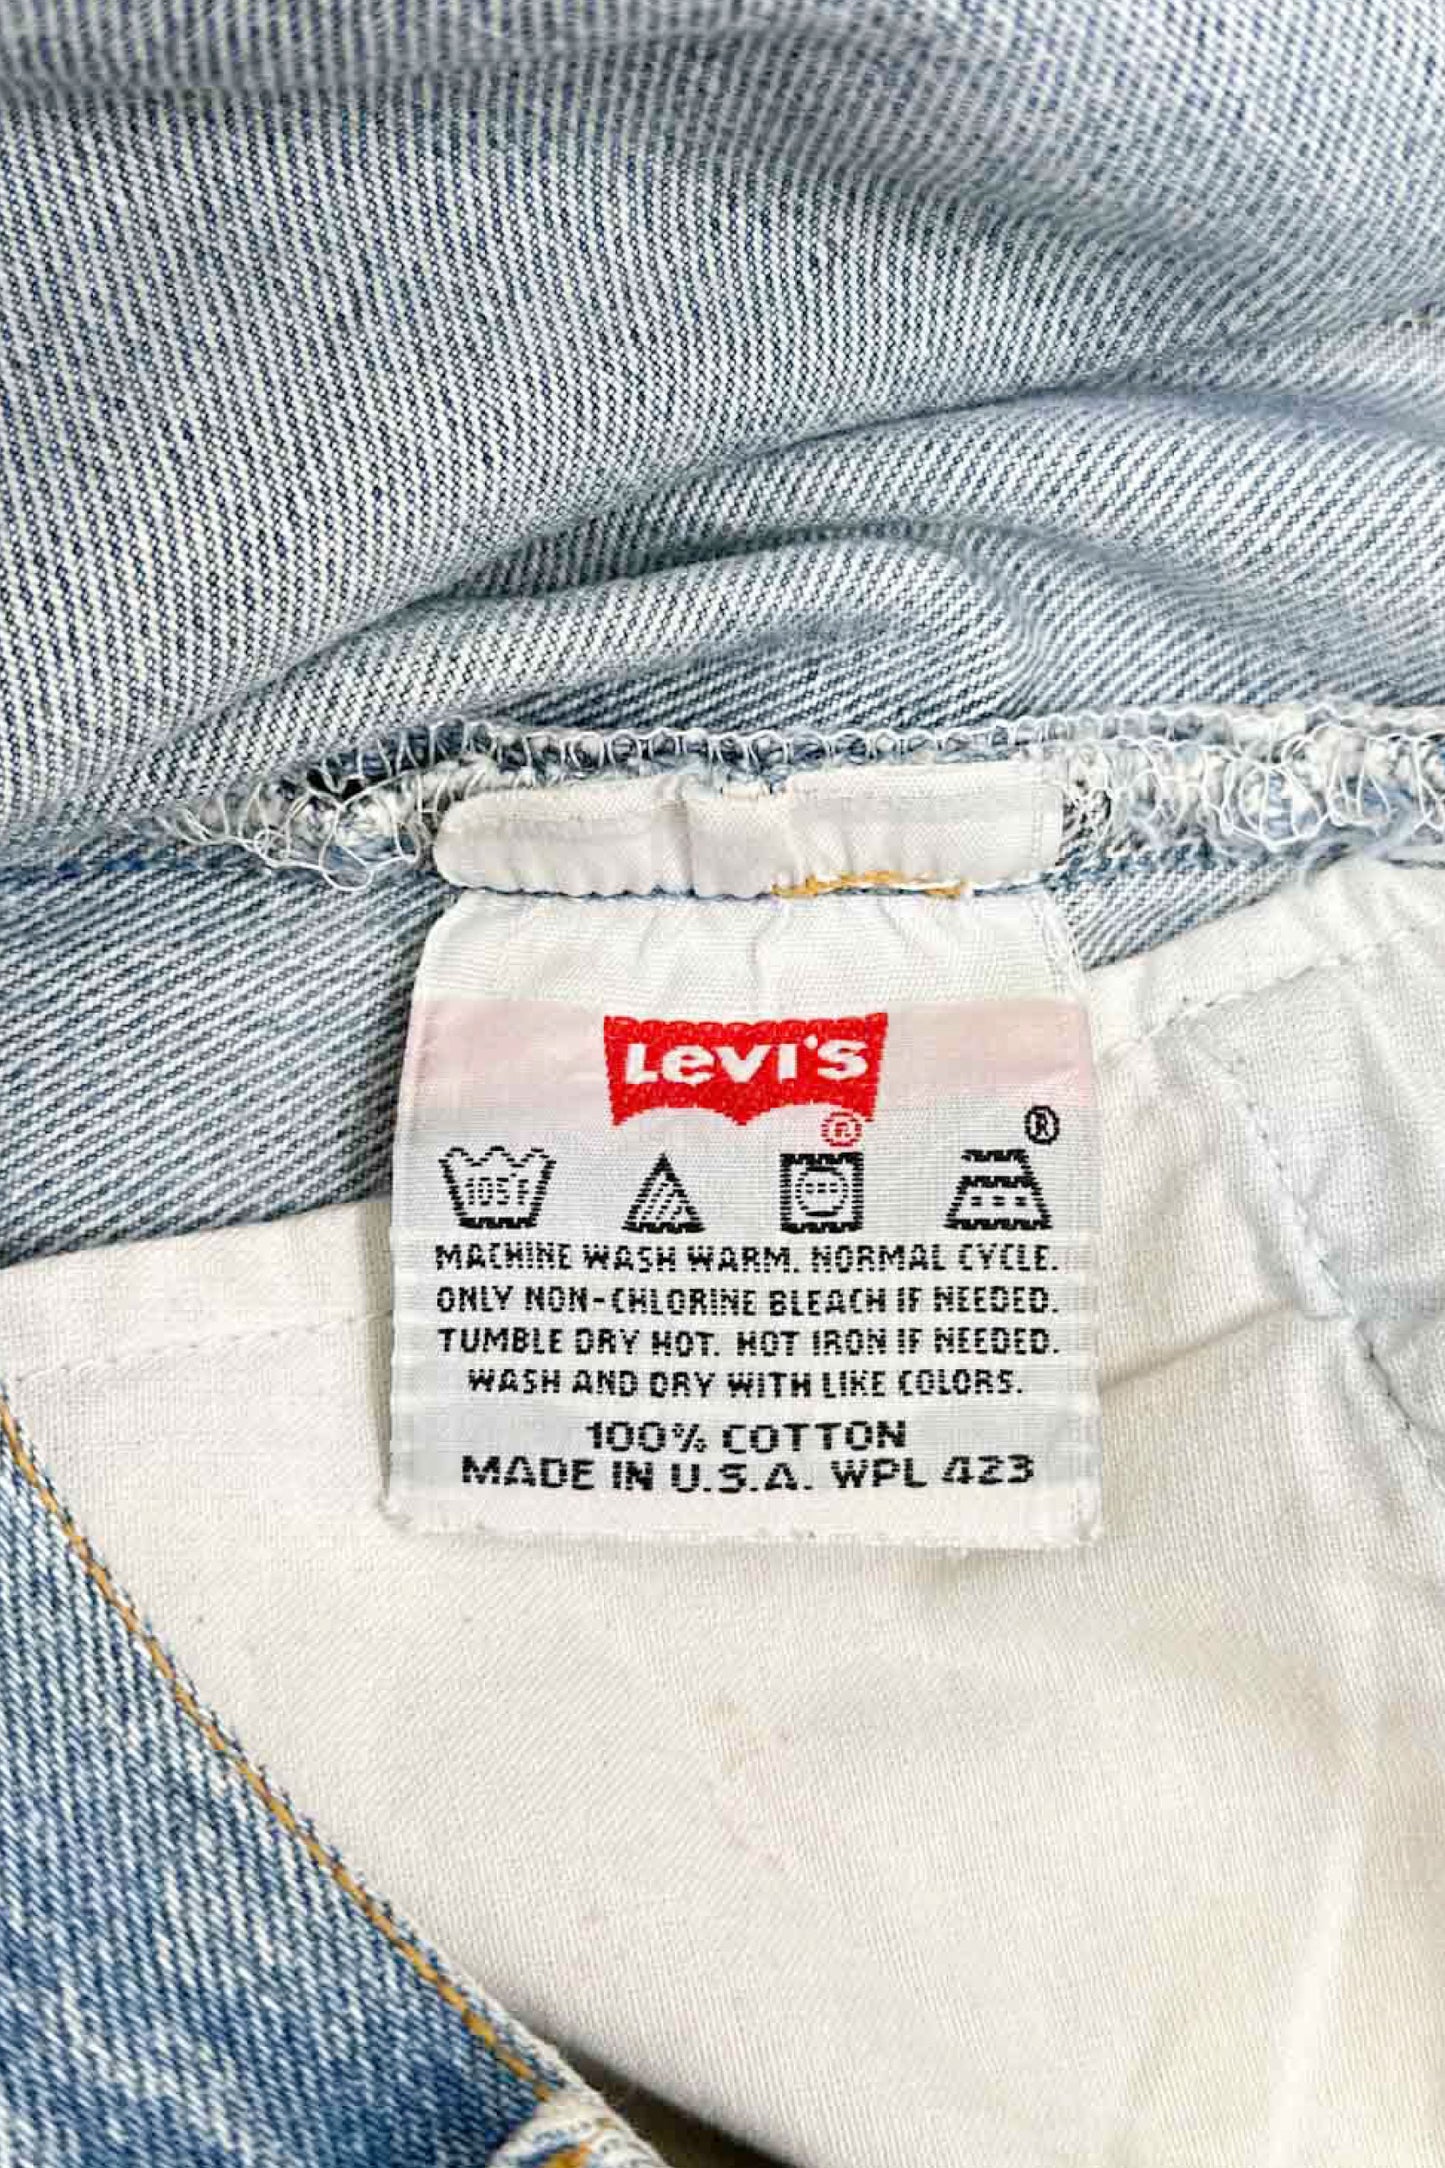 90's Made in USA Levi's 501 W35L30 denim pants